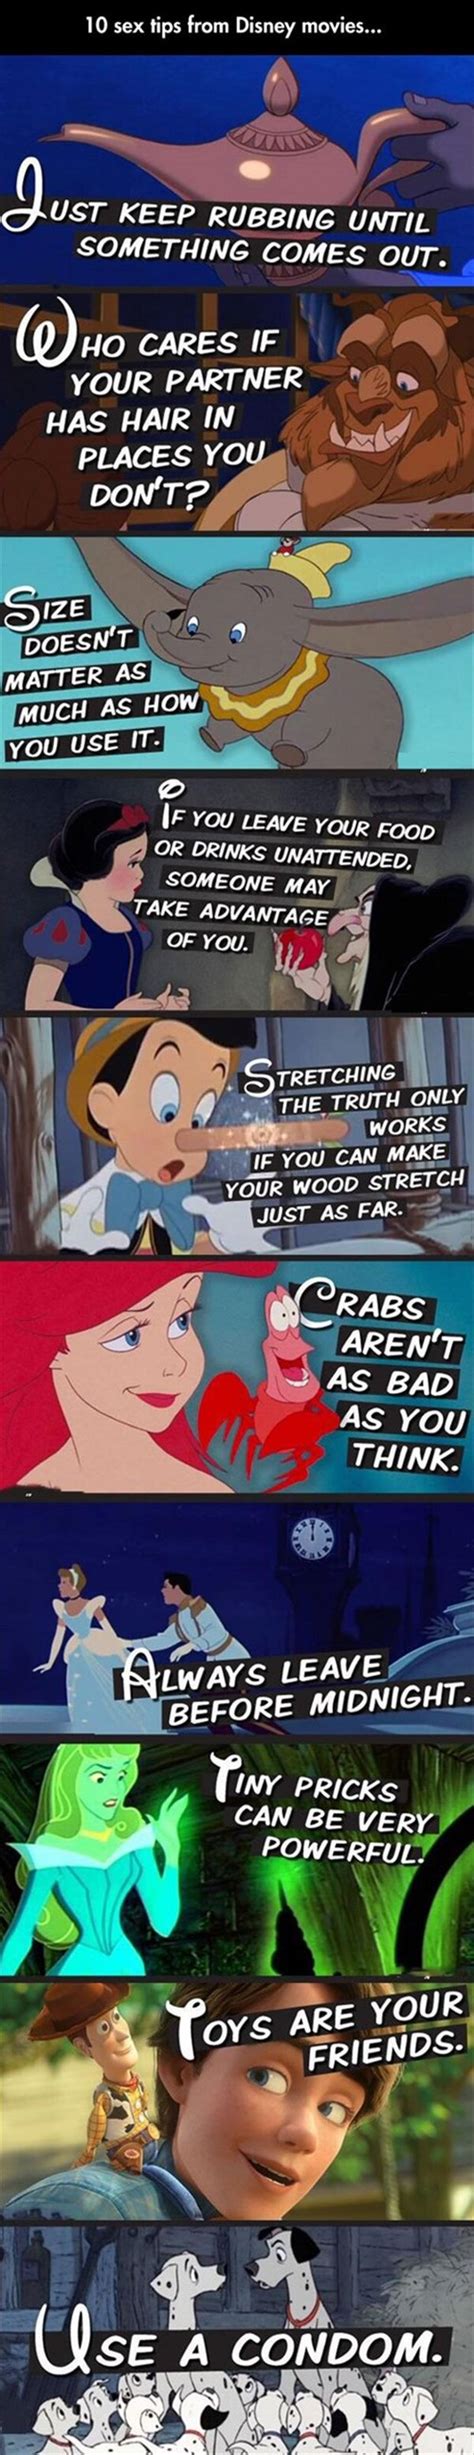 sex will surely be better if you listen to these tips from disney